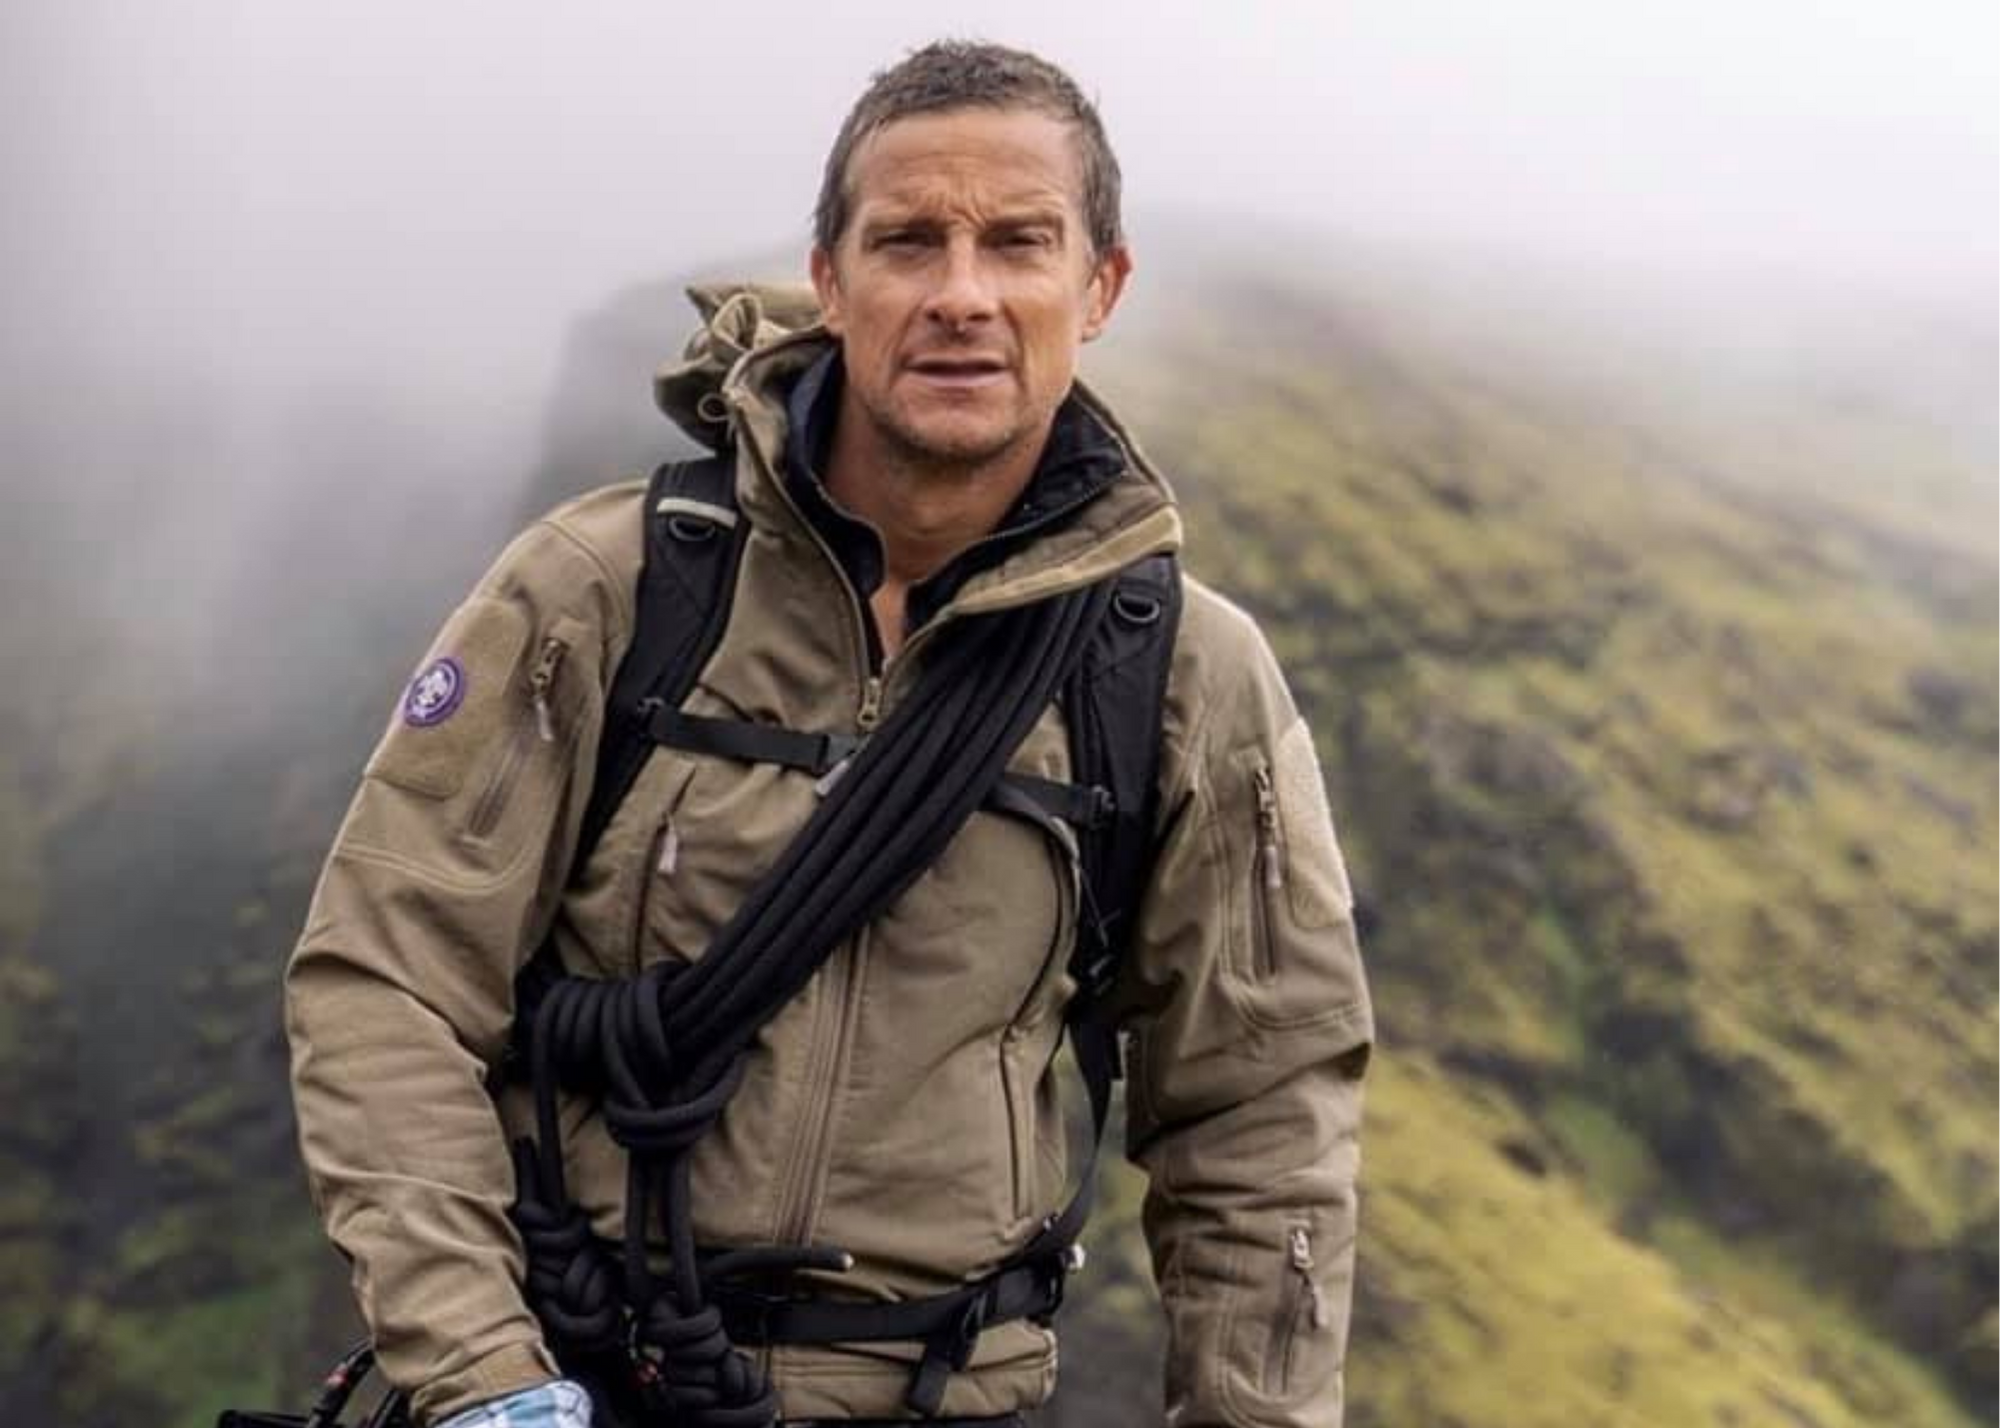 EXCLUSIVE: Watch the Trailer for New Season of NatGeo's Running Wild with Bear  Grylls - Outdoors with Bear Grylls